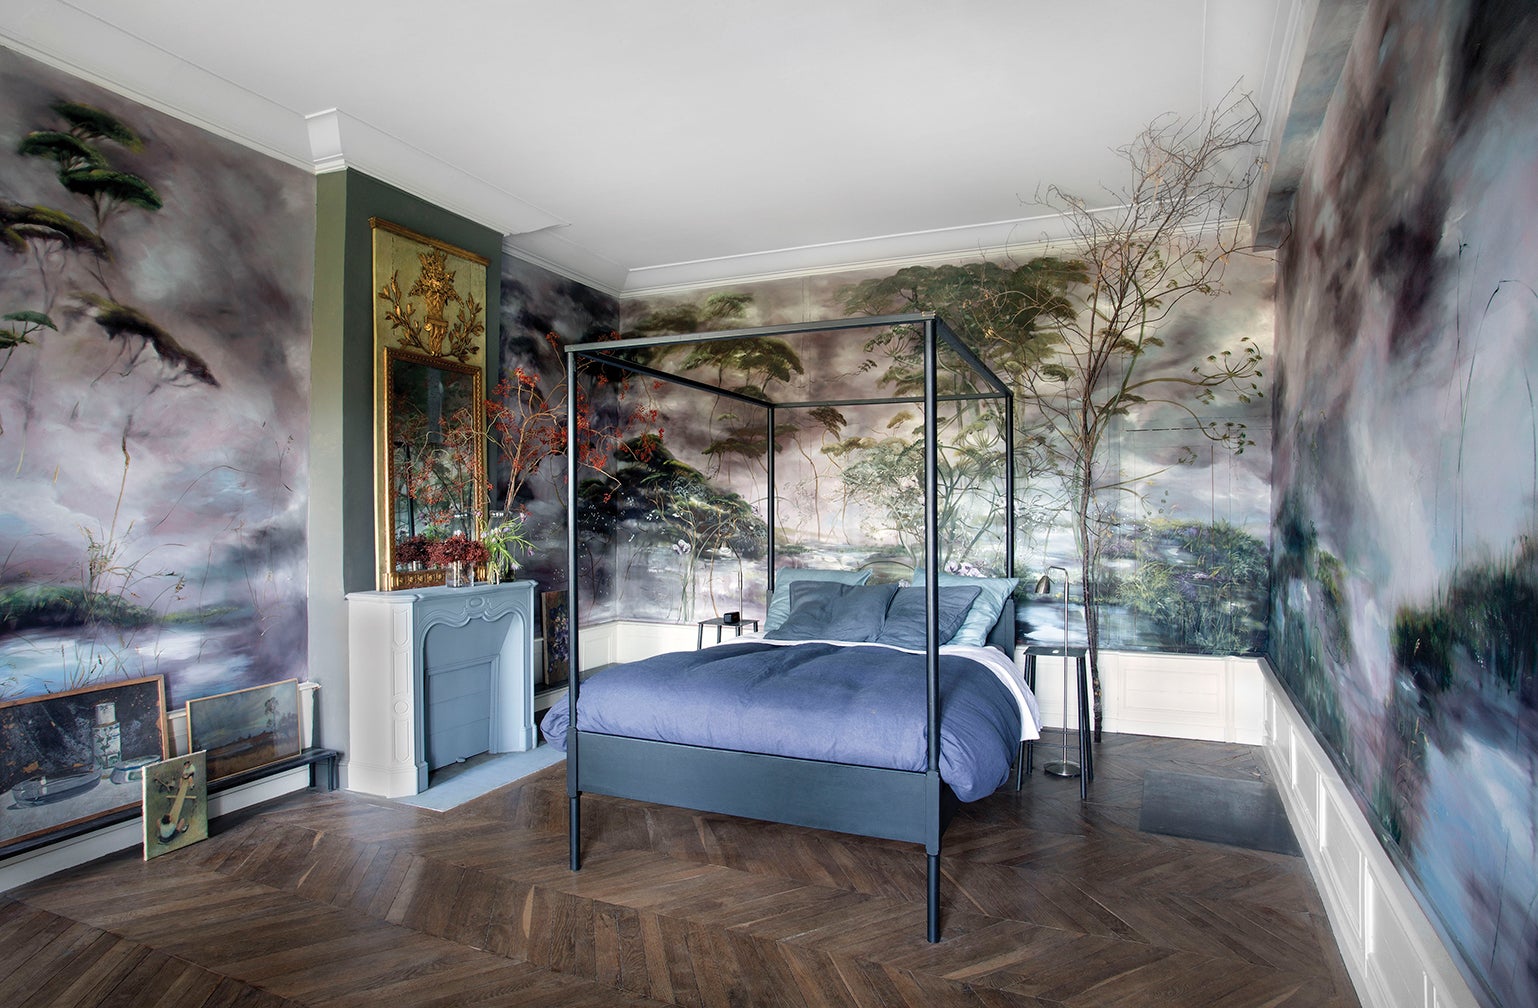 Bedroom with painted mural and branches